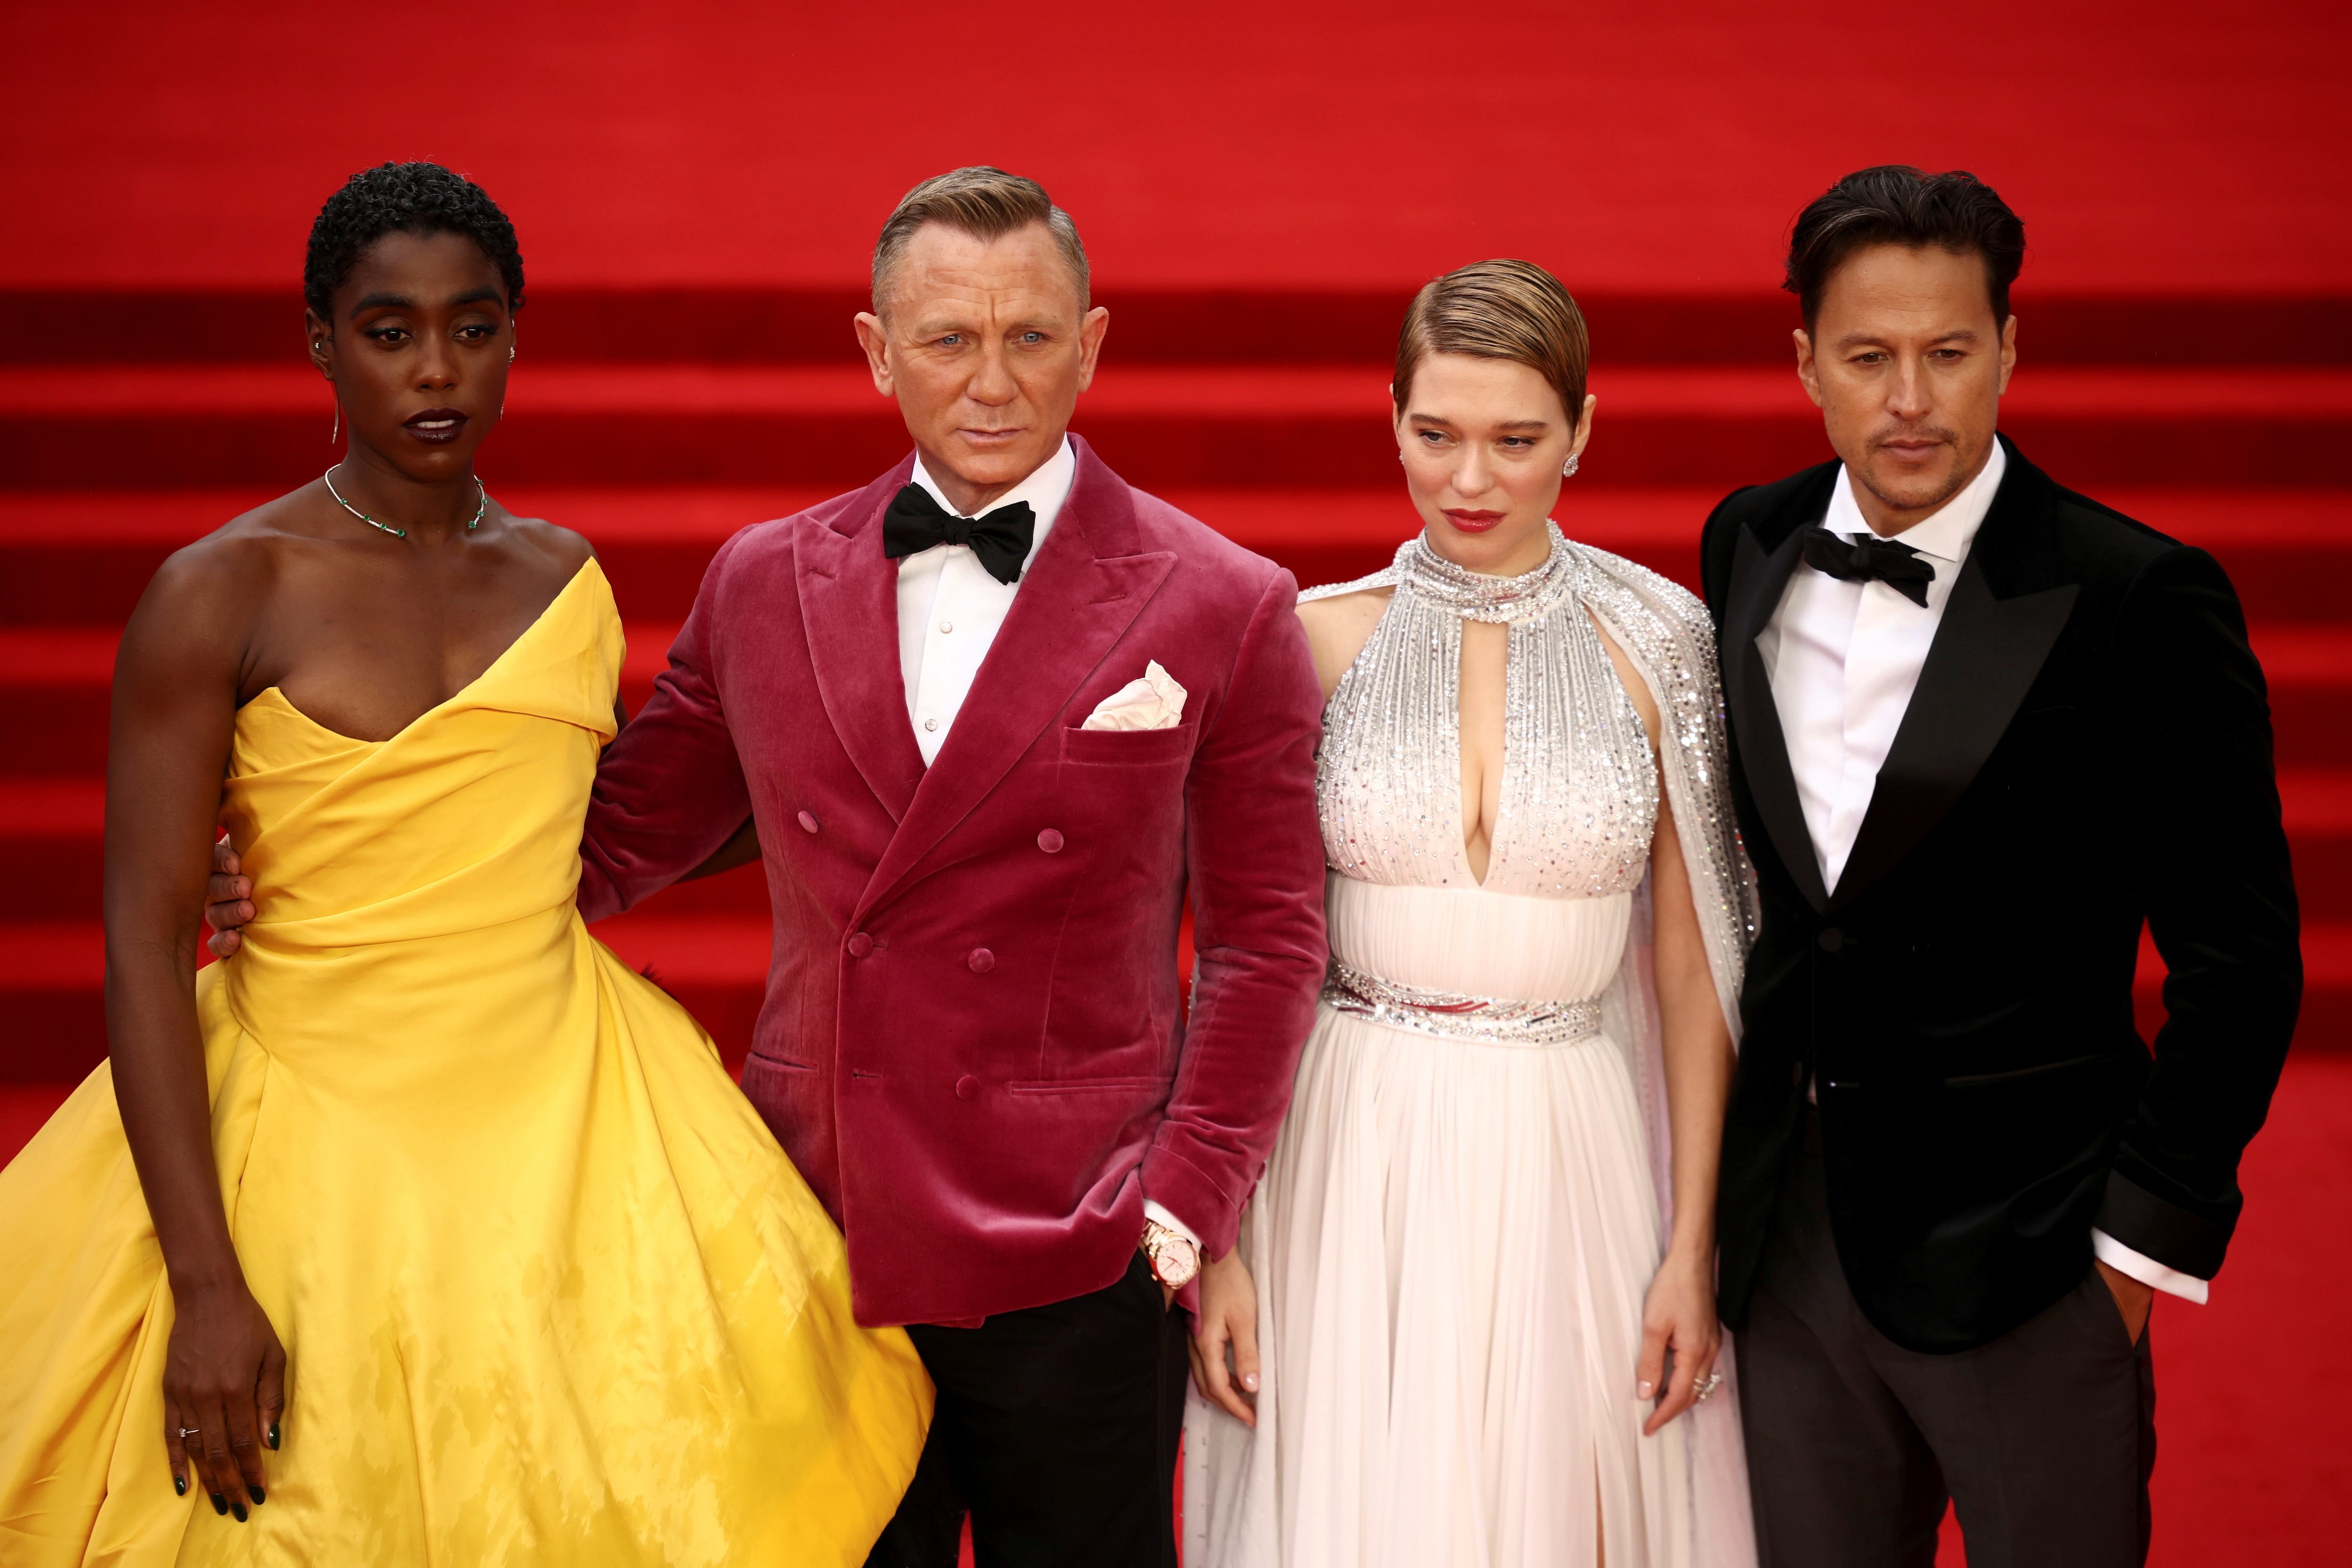 Cast members Lashana Lynch, Daniel Craig, Lea Seydoux and director Cary Fukunaga pose during the world premiere of the new James Bond film "No Time To Die" at the Royal Albert Hall in London, Britain(REUTERS/Henry Nicholls/File Photo)